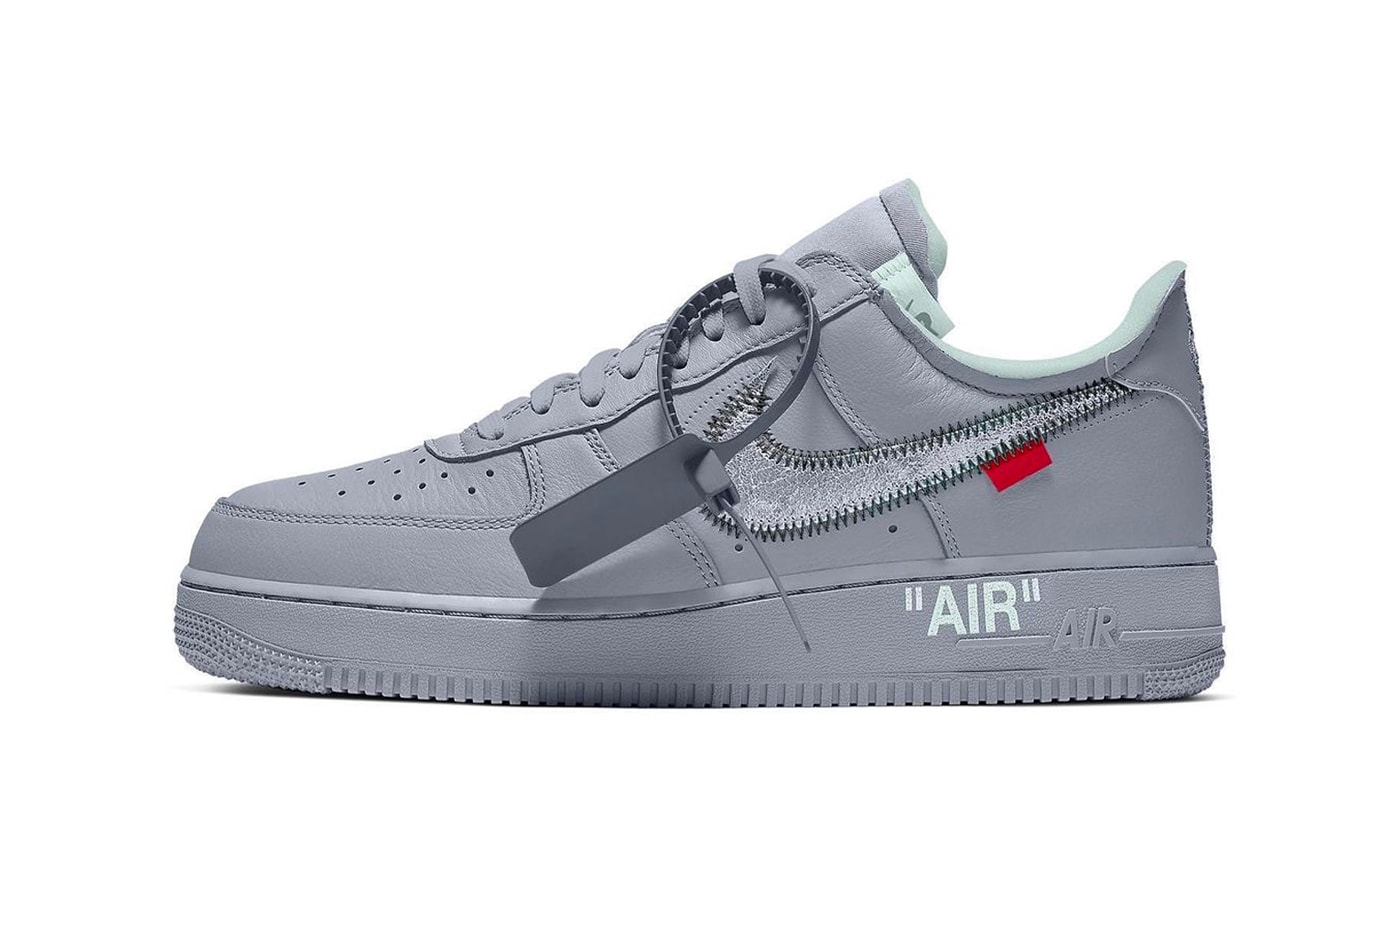 How To Put AF1 Tag On Air Force 1s! 